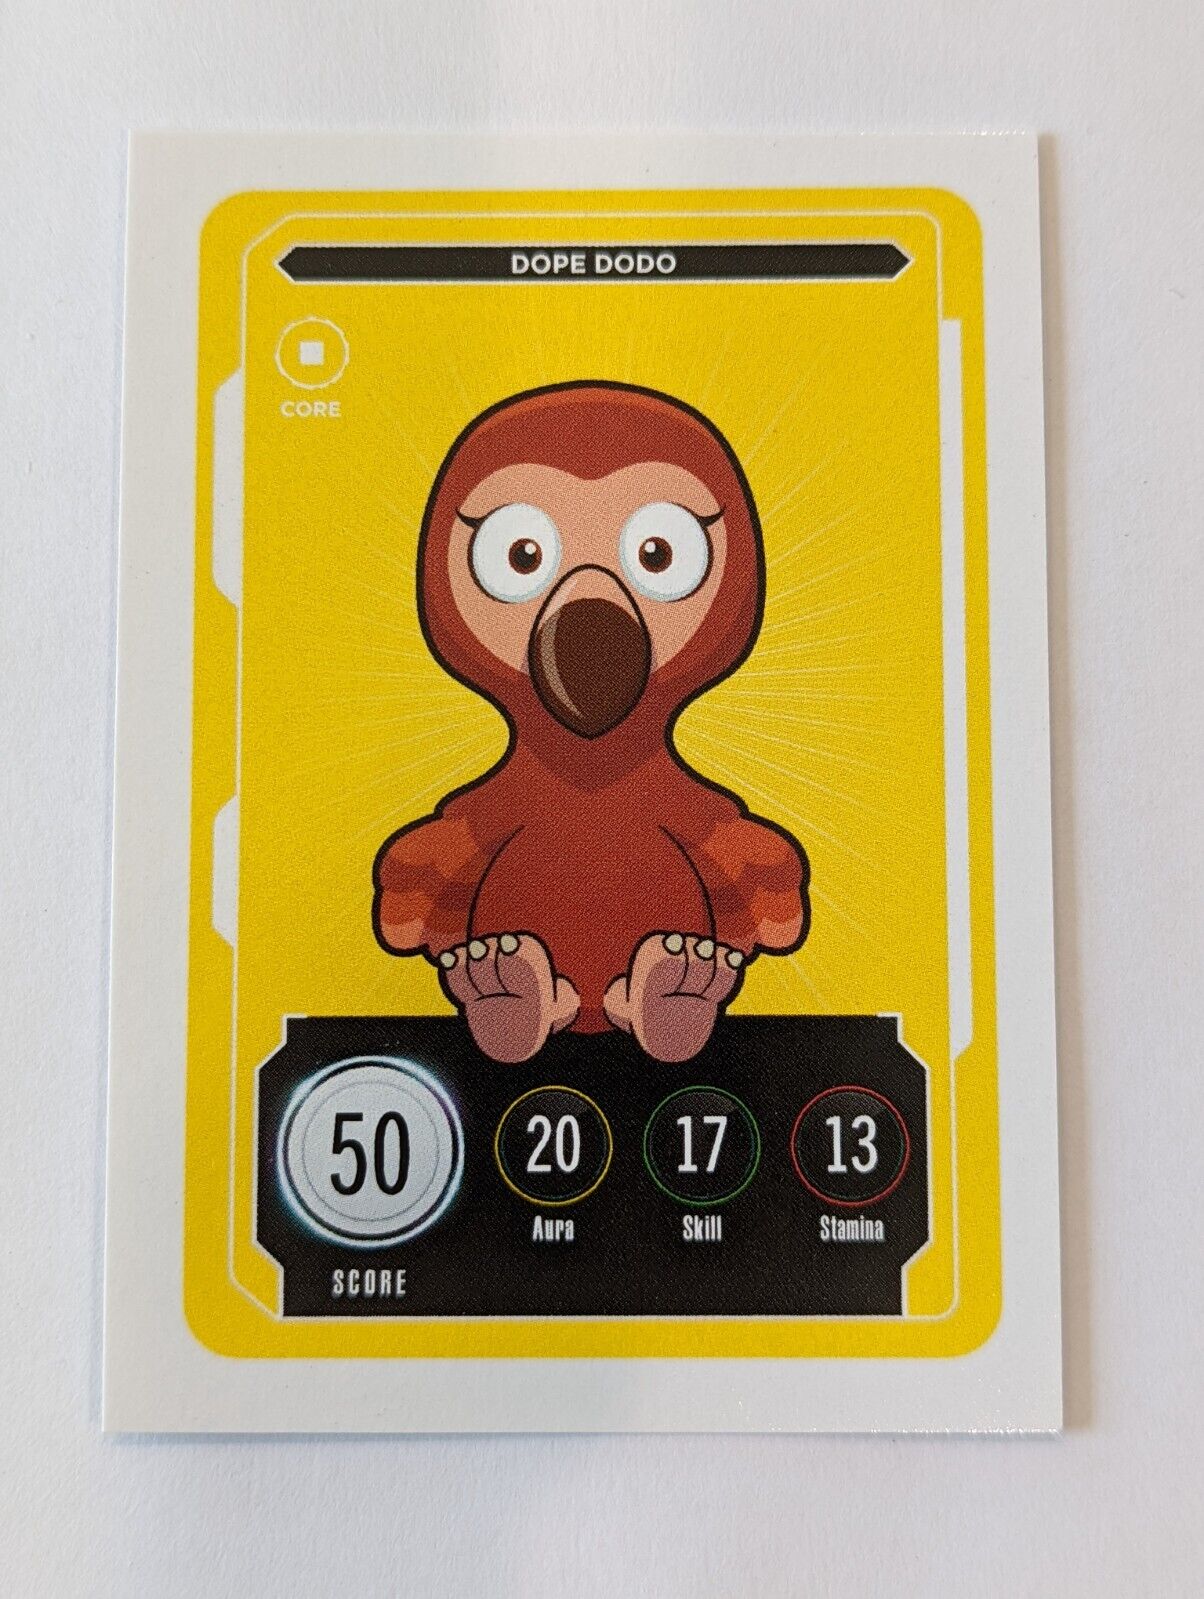 Dope Dodo Veefriends Compete And Collect Series 2 Trading Card Gary Vee